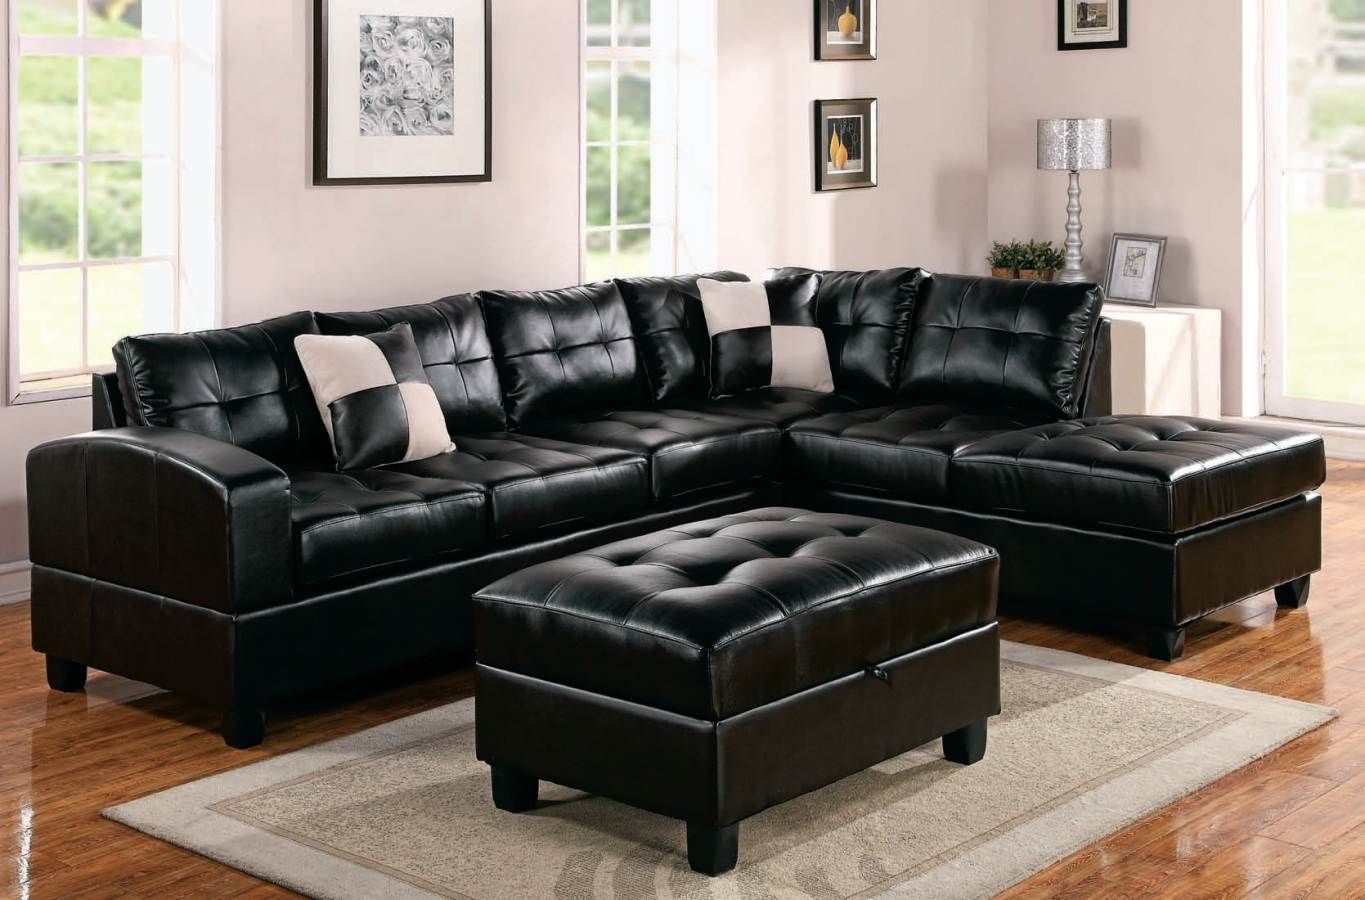 Modern Black Leather Sectional Sofa – Home Furniture Design Pertaining To Right Facing Black Sofas (View 9 of 20)